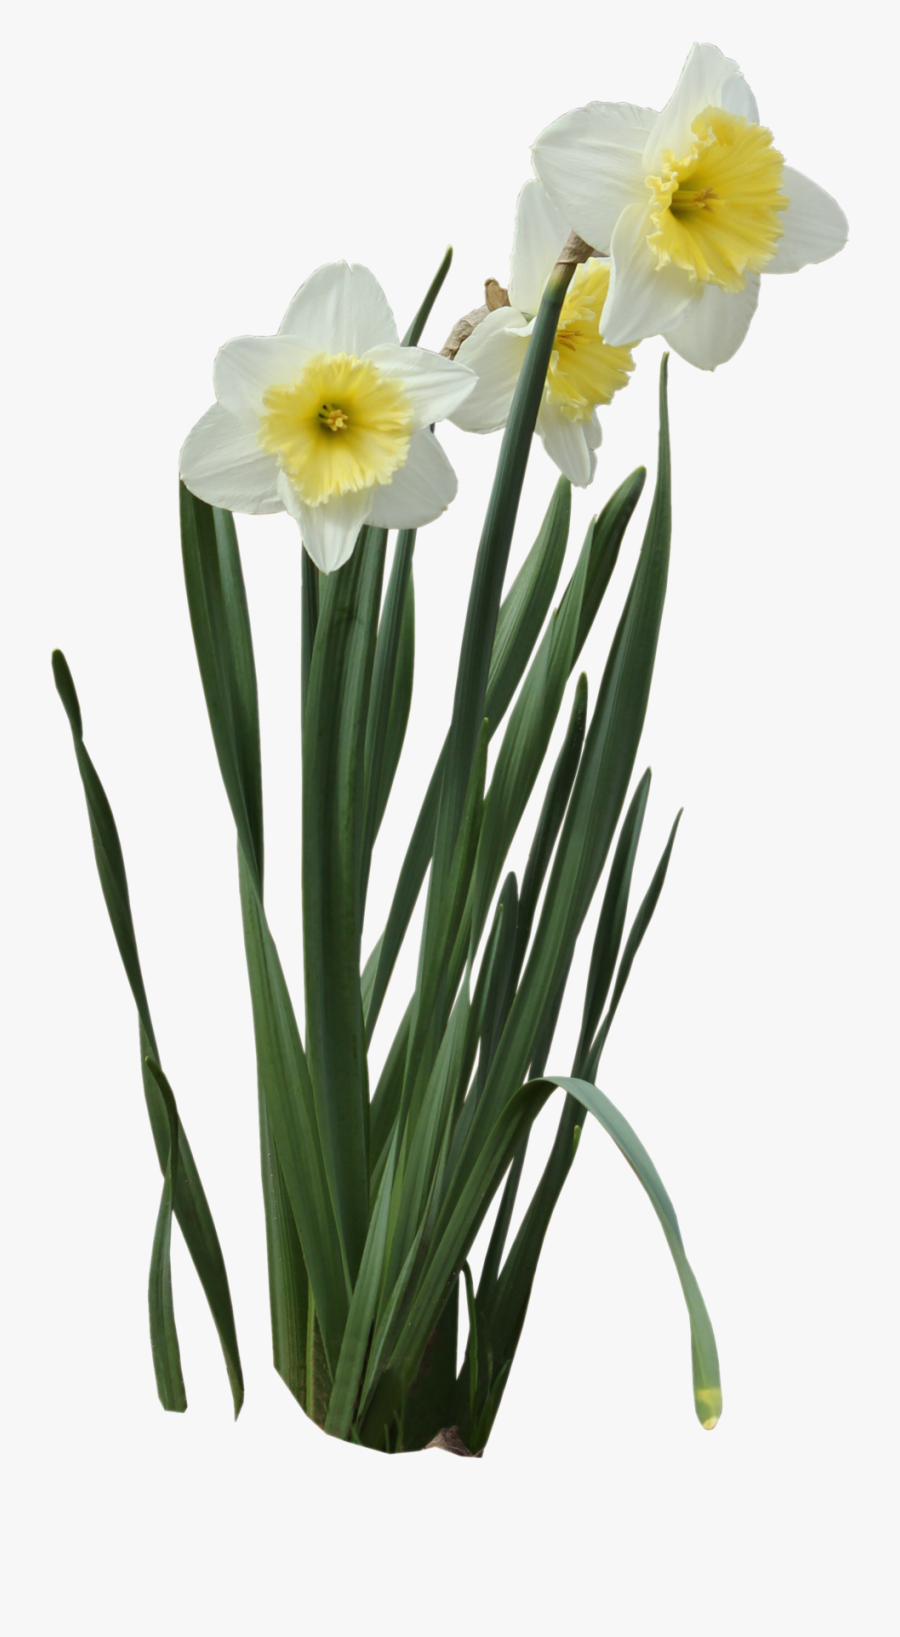 Download-daffodils - Transparent Background Daffodil Png, Transparent Clipart